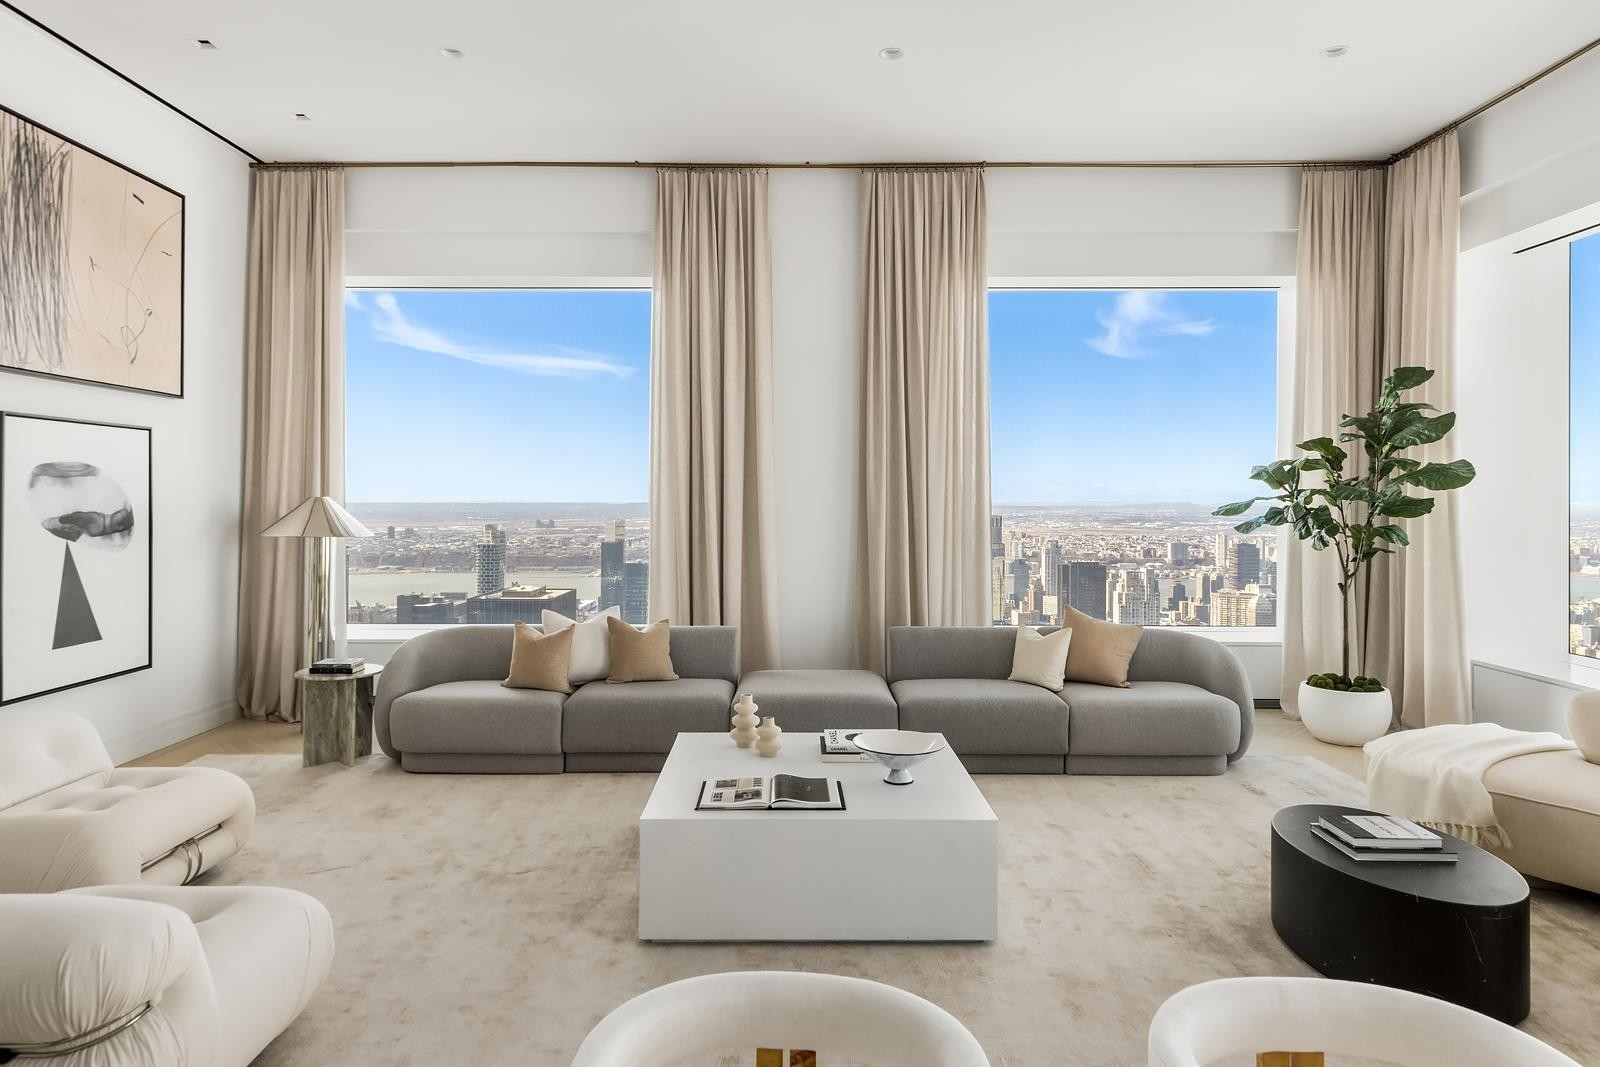 1. Rentals at 432 PARK AVE, 66B Midtown East, New York, New York 10022